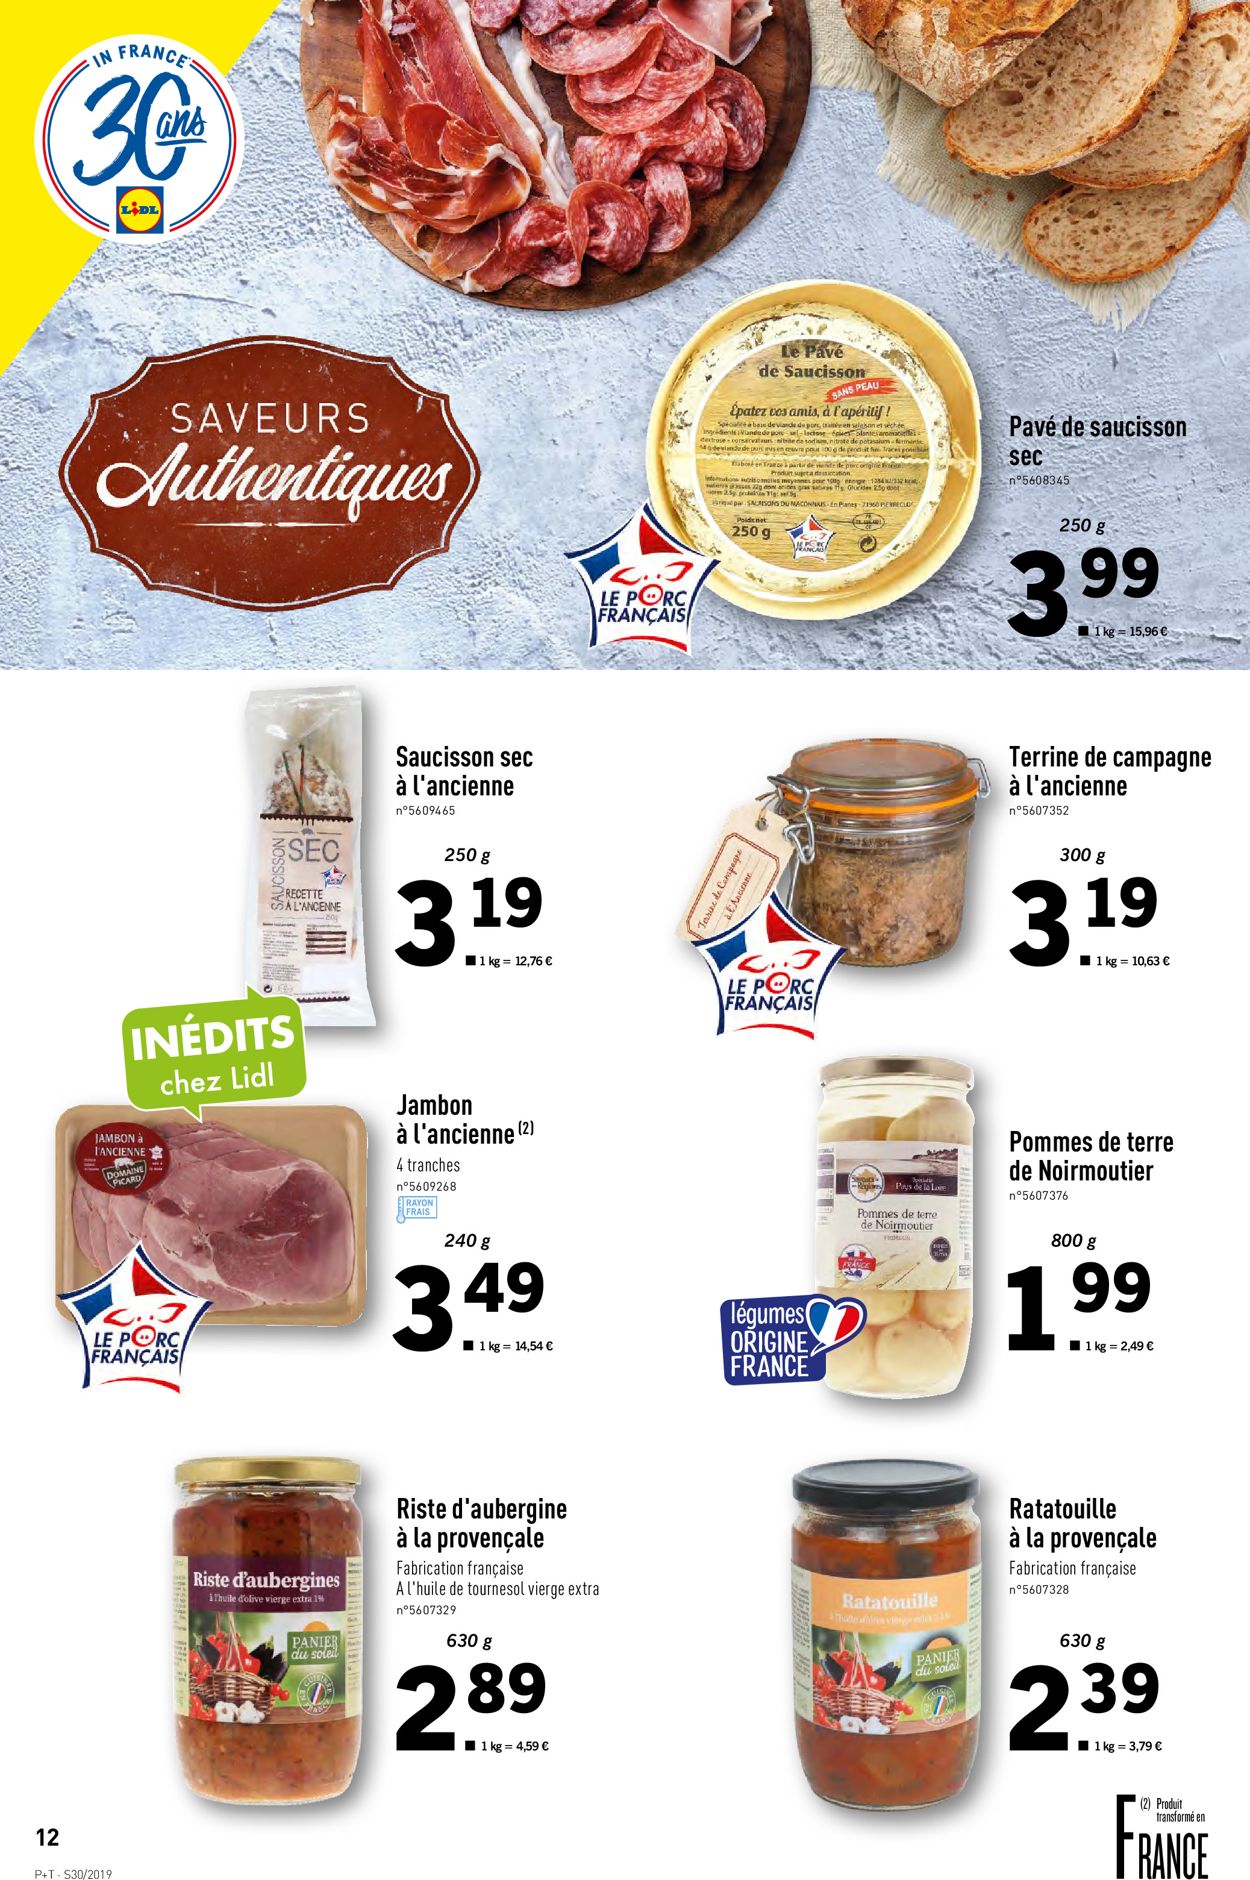 Lidl Catalogue - 24.07-30.07.2019 (Page 12)